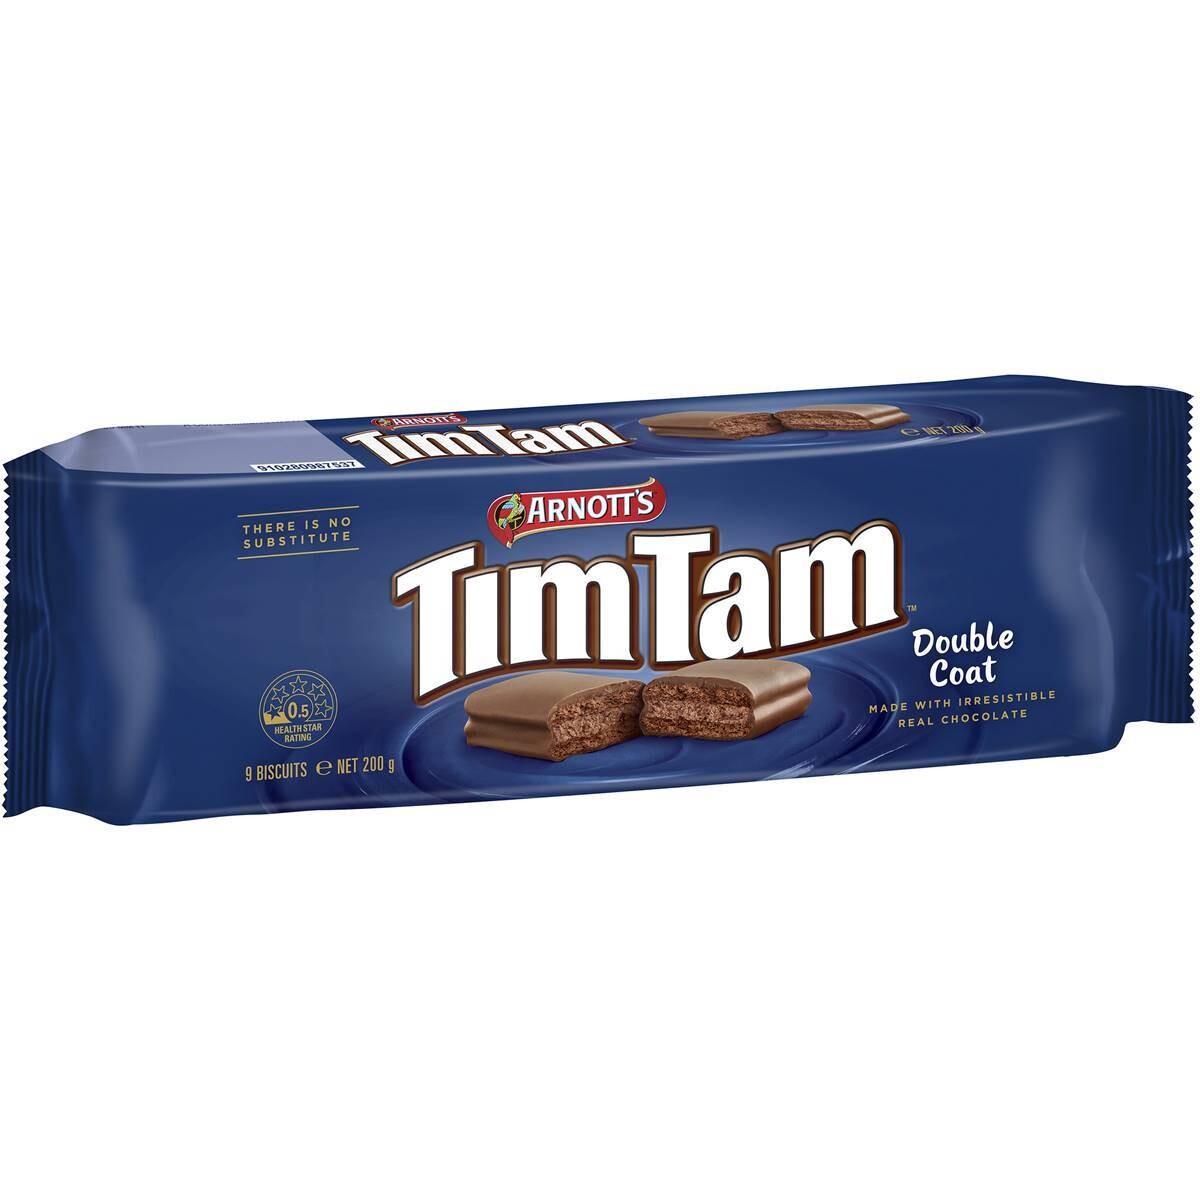 Arnott's Australia Tim Tam Double Coat Made With Irresistible Real Chocolate Biscuits 200g (Imported) | Made in Australia